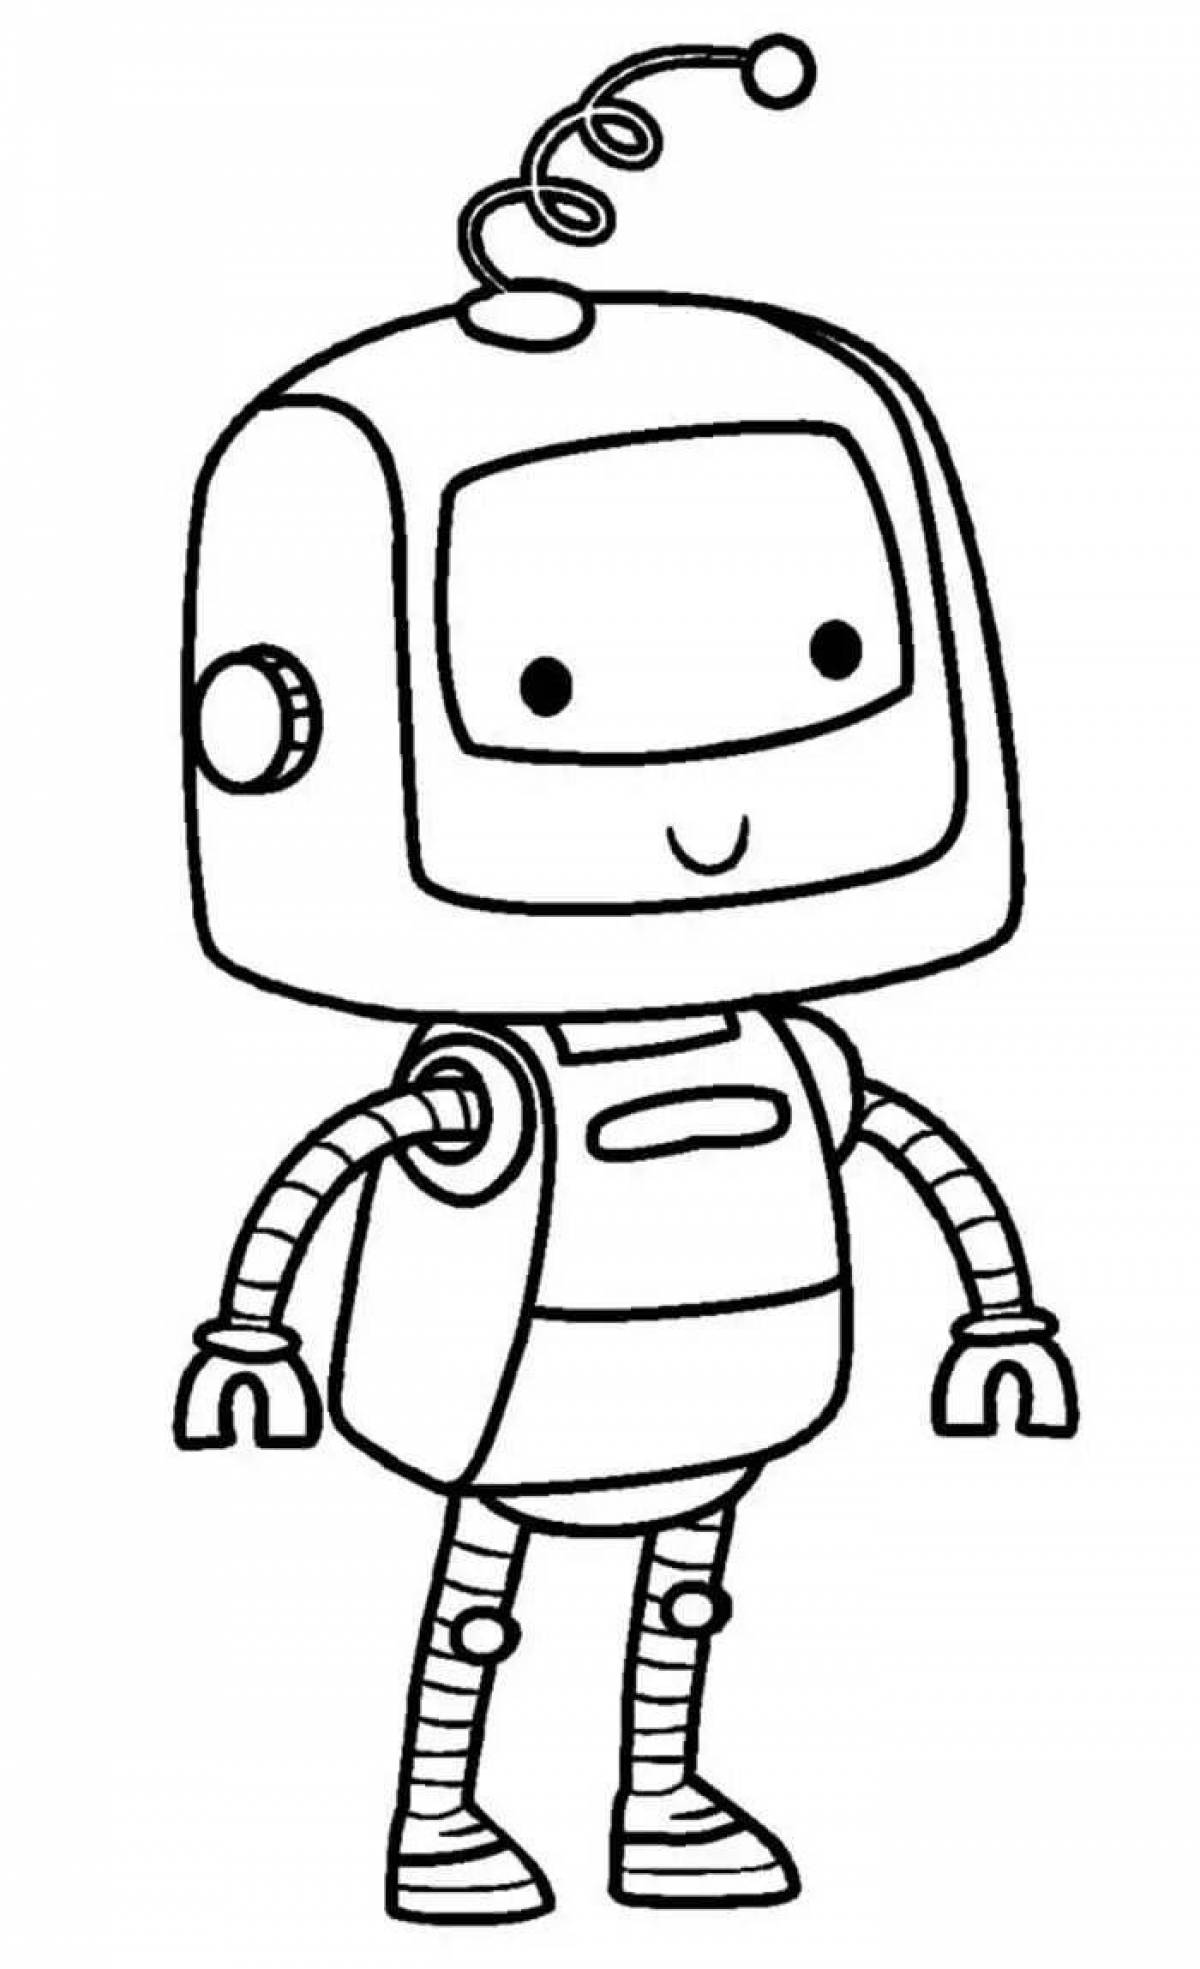 Fun coloring robot for 5 year olds